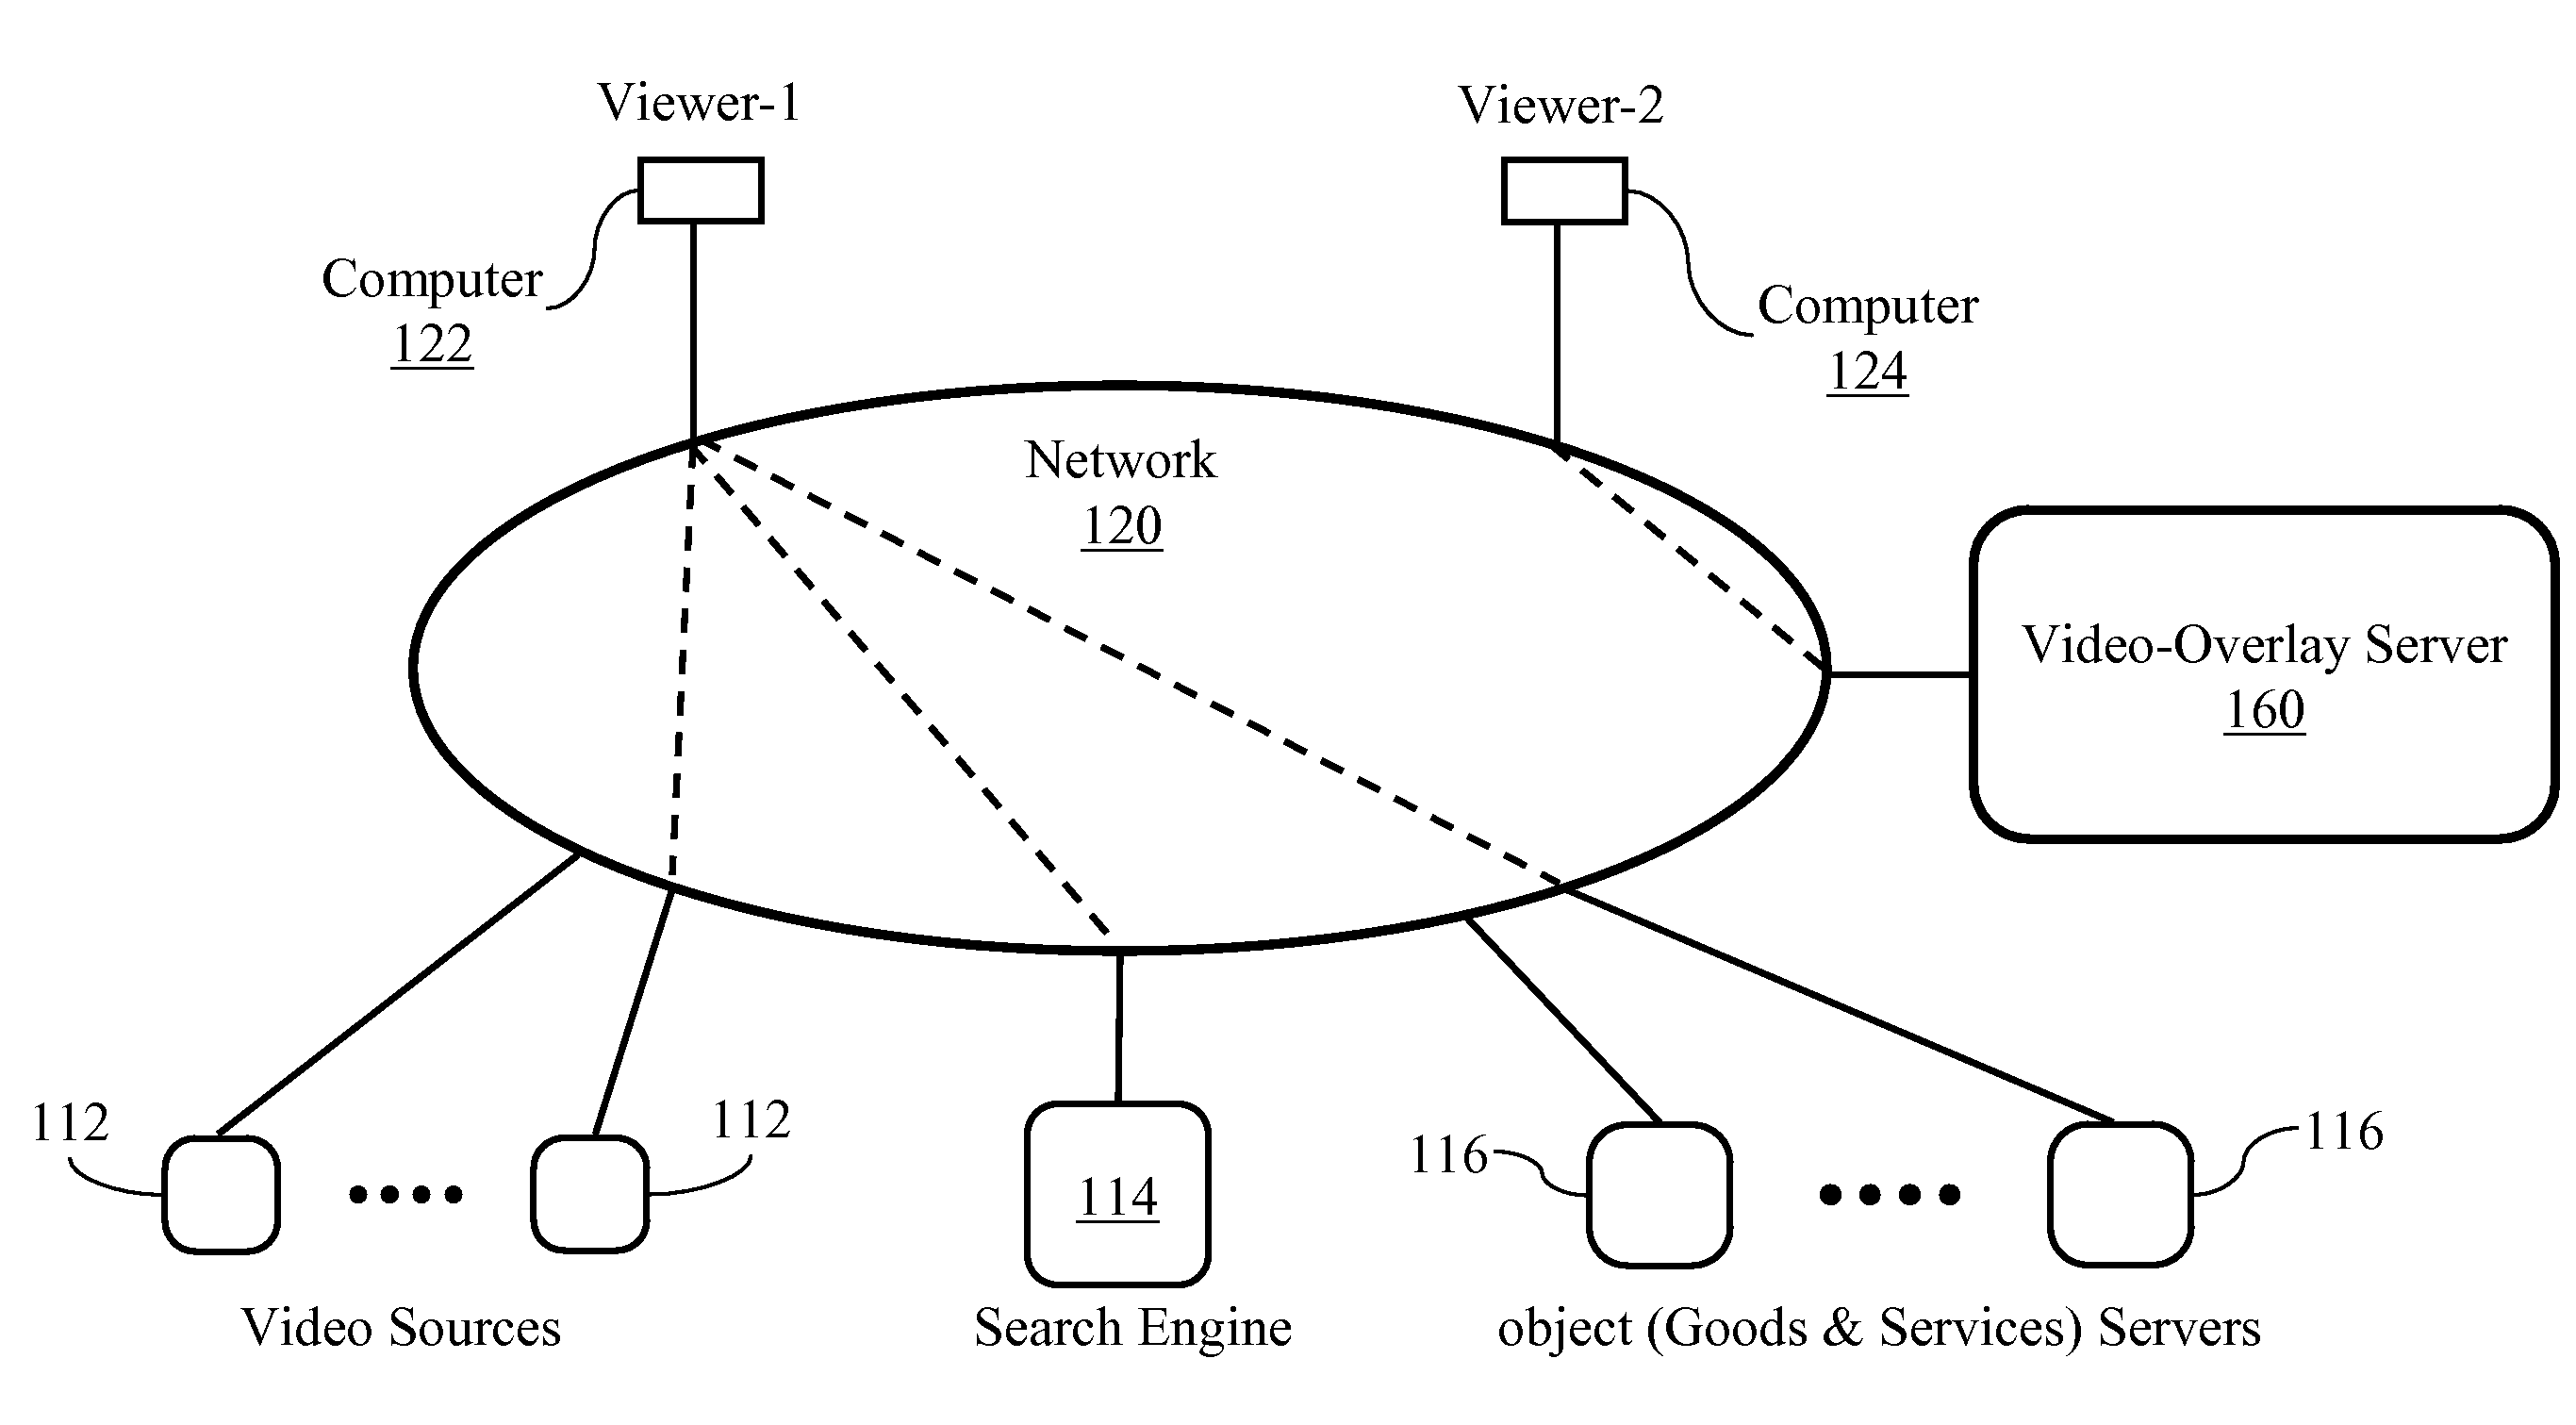 Video player for exhibiting content of video signals with content linking to information sources